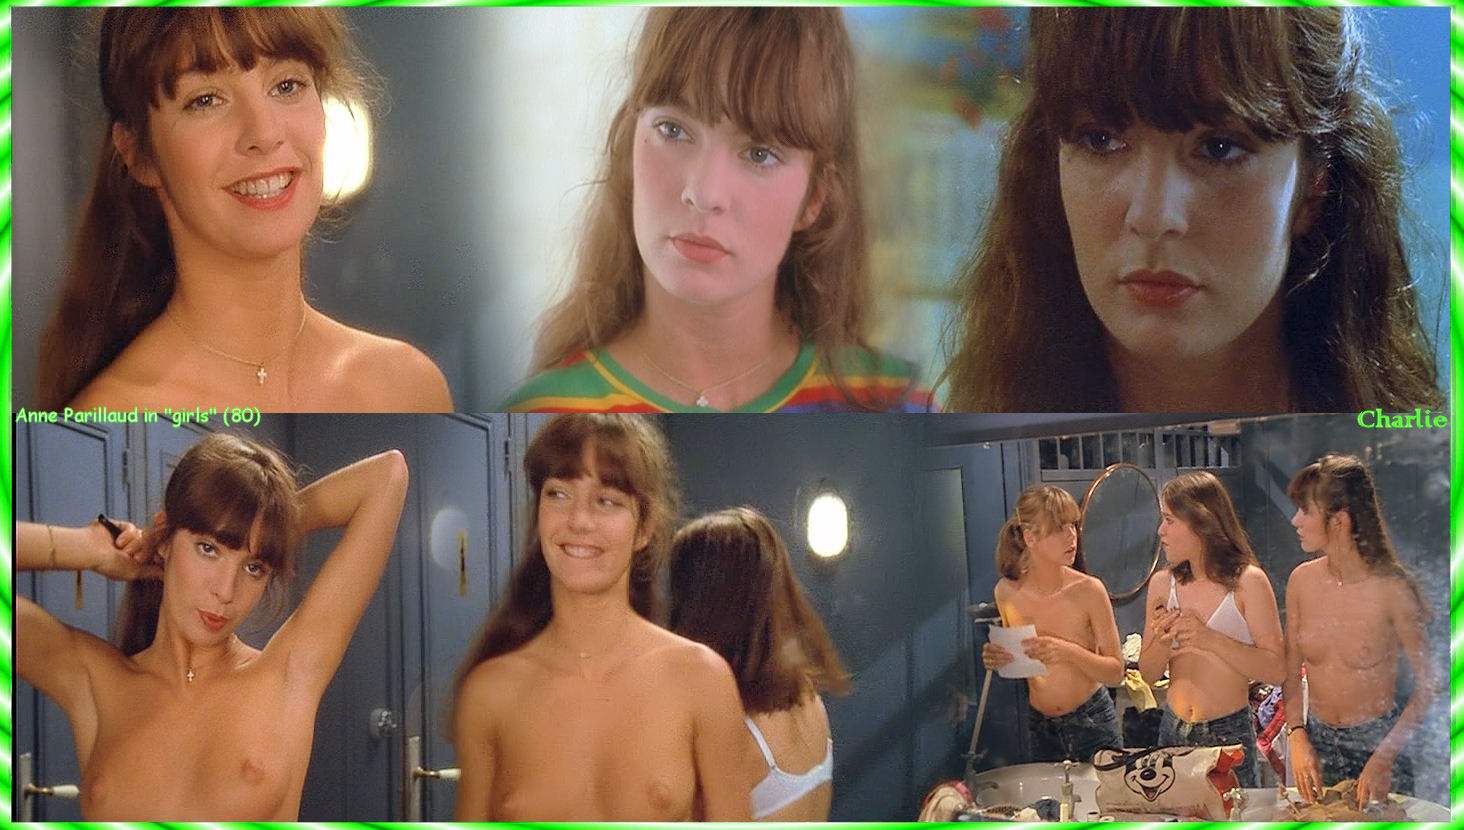 Anne parillaud naked